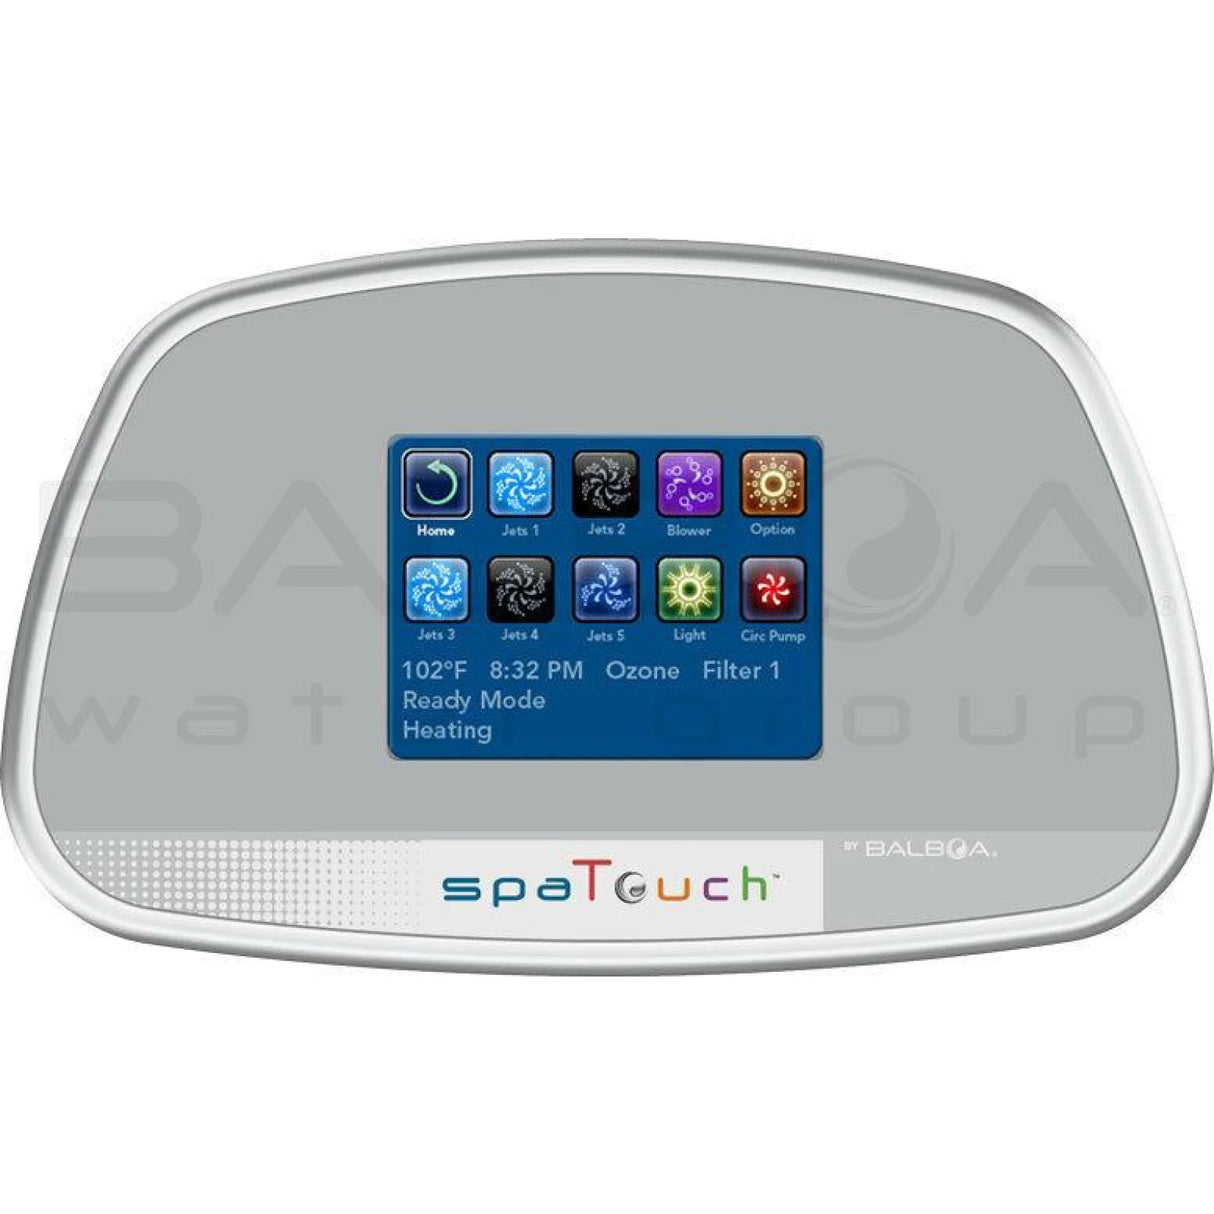 SpaTouch by Balboa Touchpad - Colour Touchscreen - Heater and Spa Parts